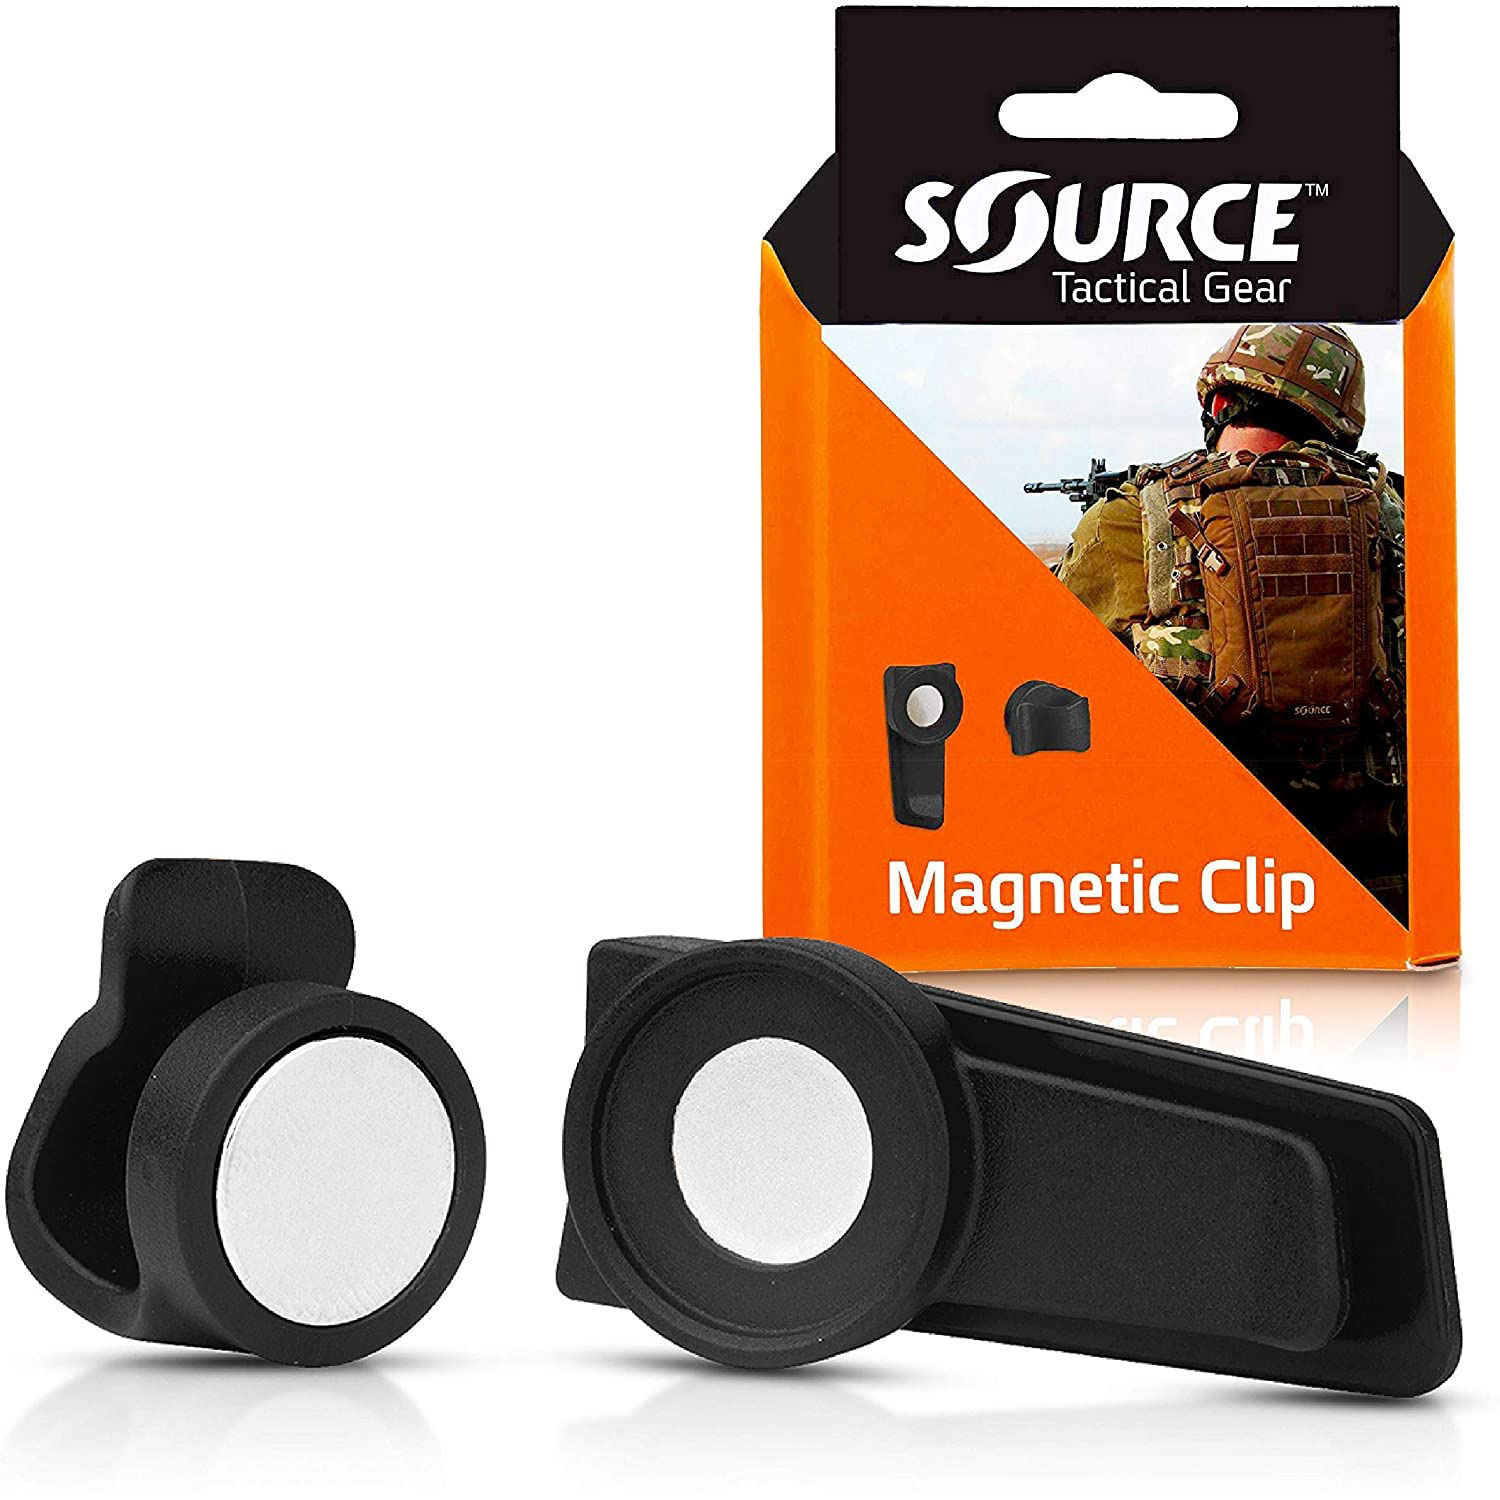 Source Magnetic Clip